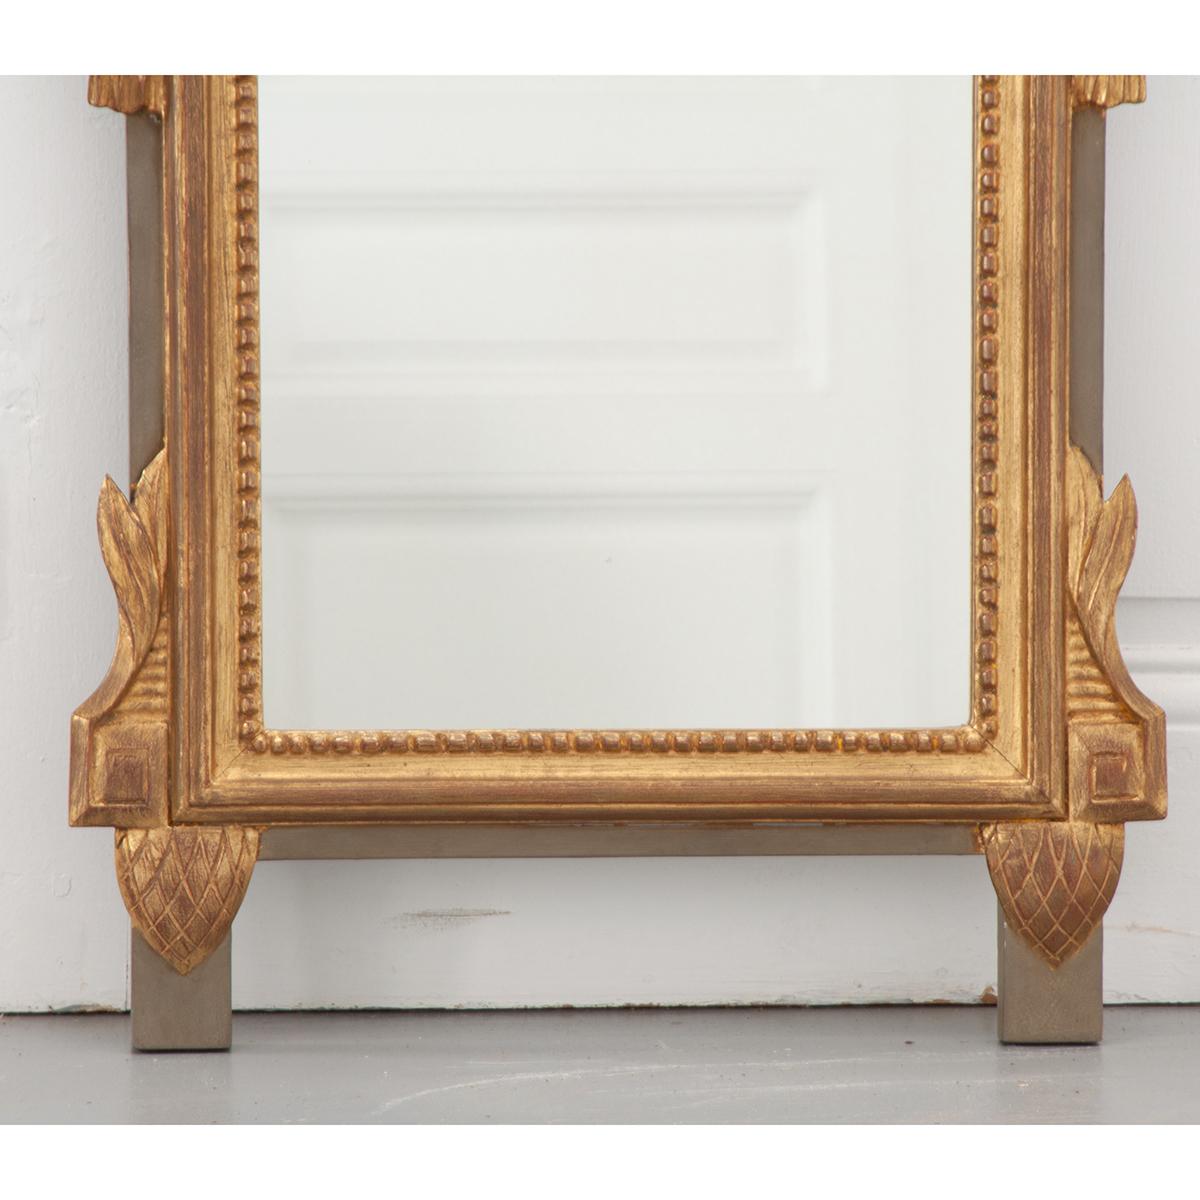 French 19th century Louis XVI-style mirror has a gold gilt finish with accents of gray-green paint. It has a wood carved crest of an urn with a floral bouquet and swags hanging down on either side. This petite mirror is very stunning.